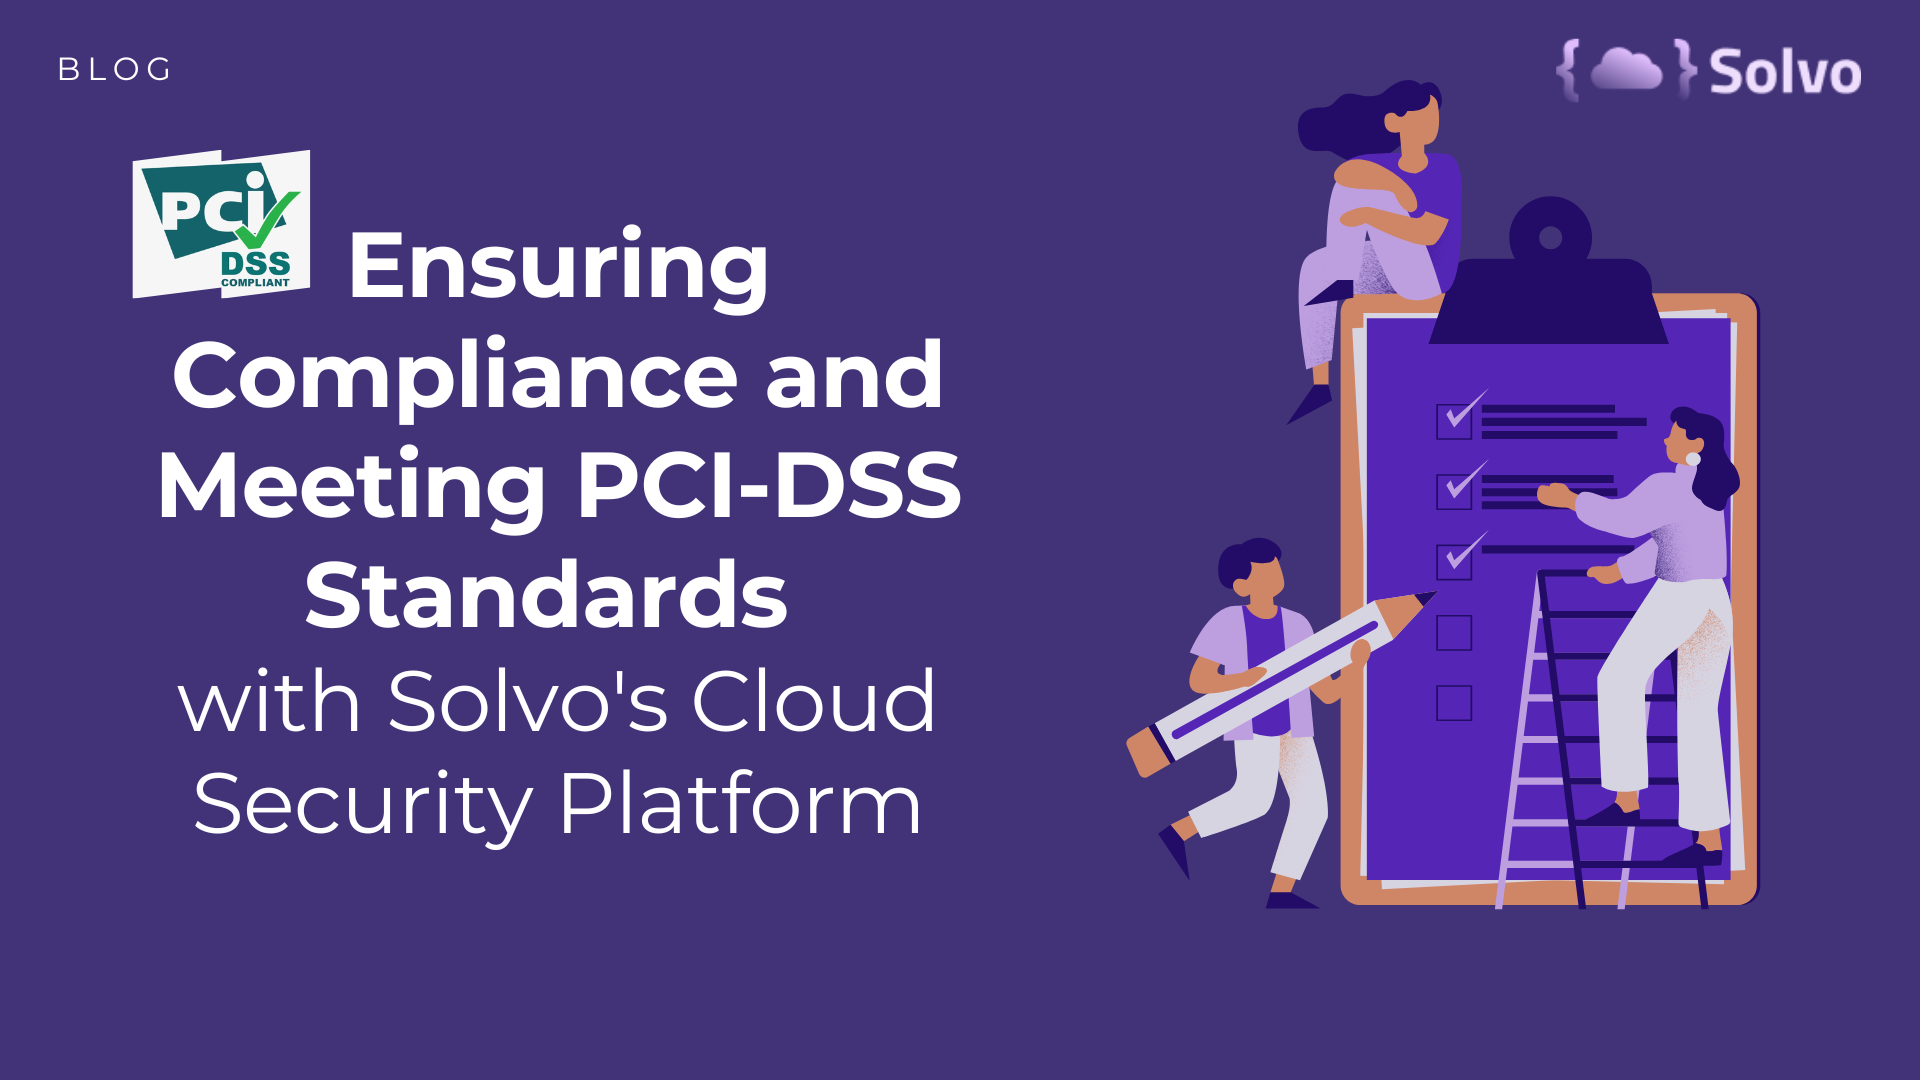 Ensuring Compliance and Meeting PCI-DSS Standards with Solvo's Cloud Security Platform